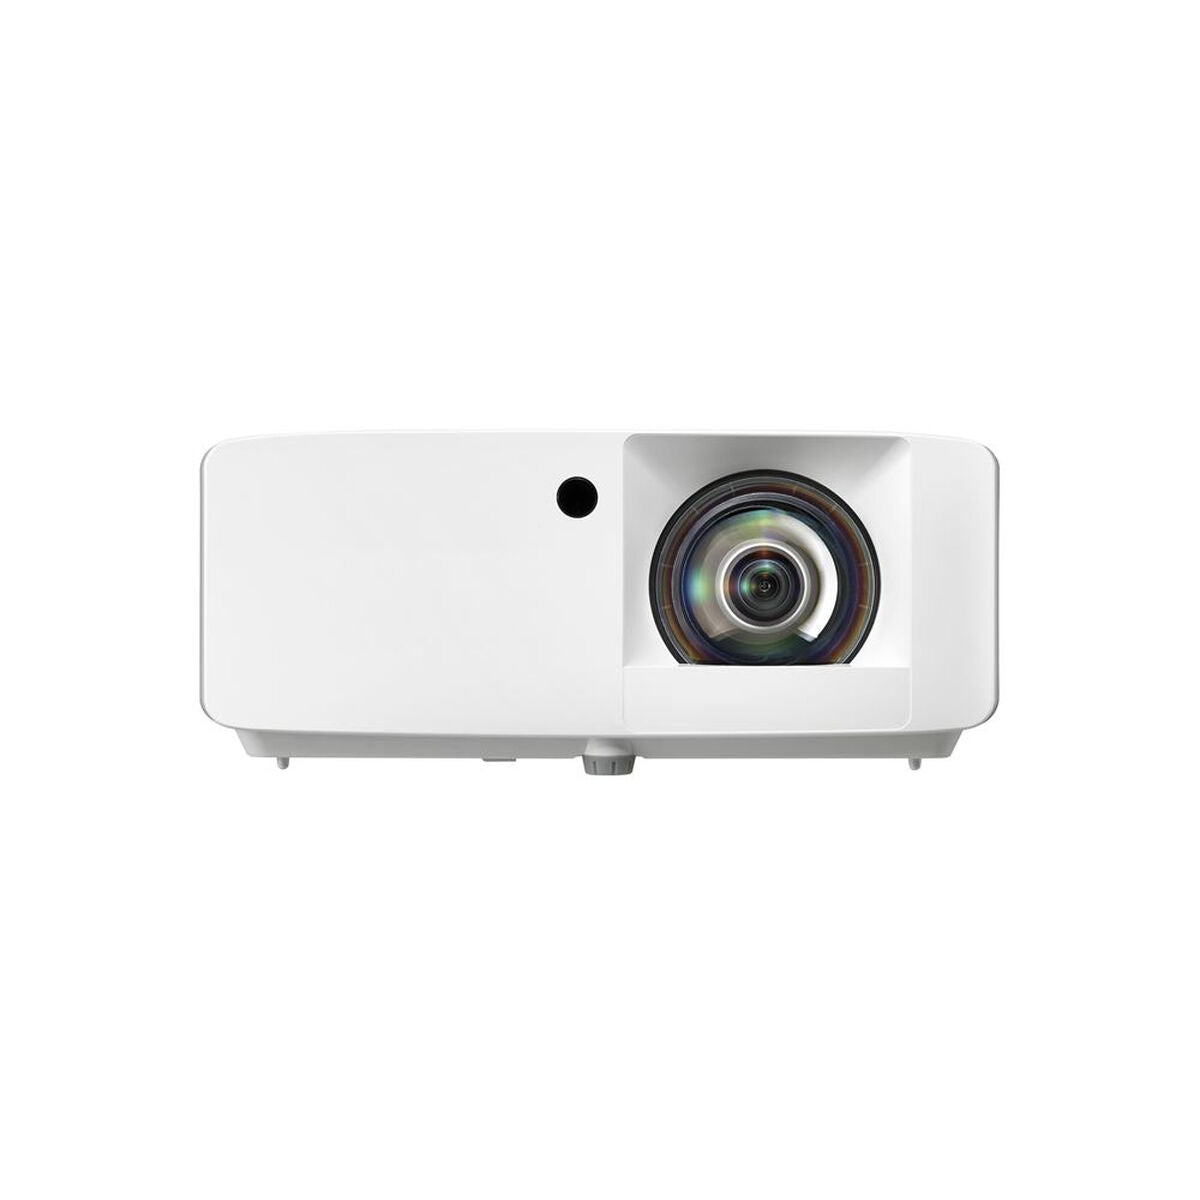 Projector Optoma E9PD7KK31EZ4 3500 lm, Optoma, Electronics, Photography and video cameras, projector-optoma-e9pd7kk31ez4-3500-lm, Brand_Optoma, category-reference-2609, category-reference-2642, category-reference-2947, category-reference-t-19653, category-reference-t-8122, computers / peripherals, Condition_NEW, entertainment, fotografía, office, Price_+ 1000, RiotNook